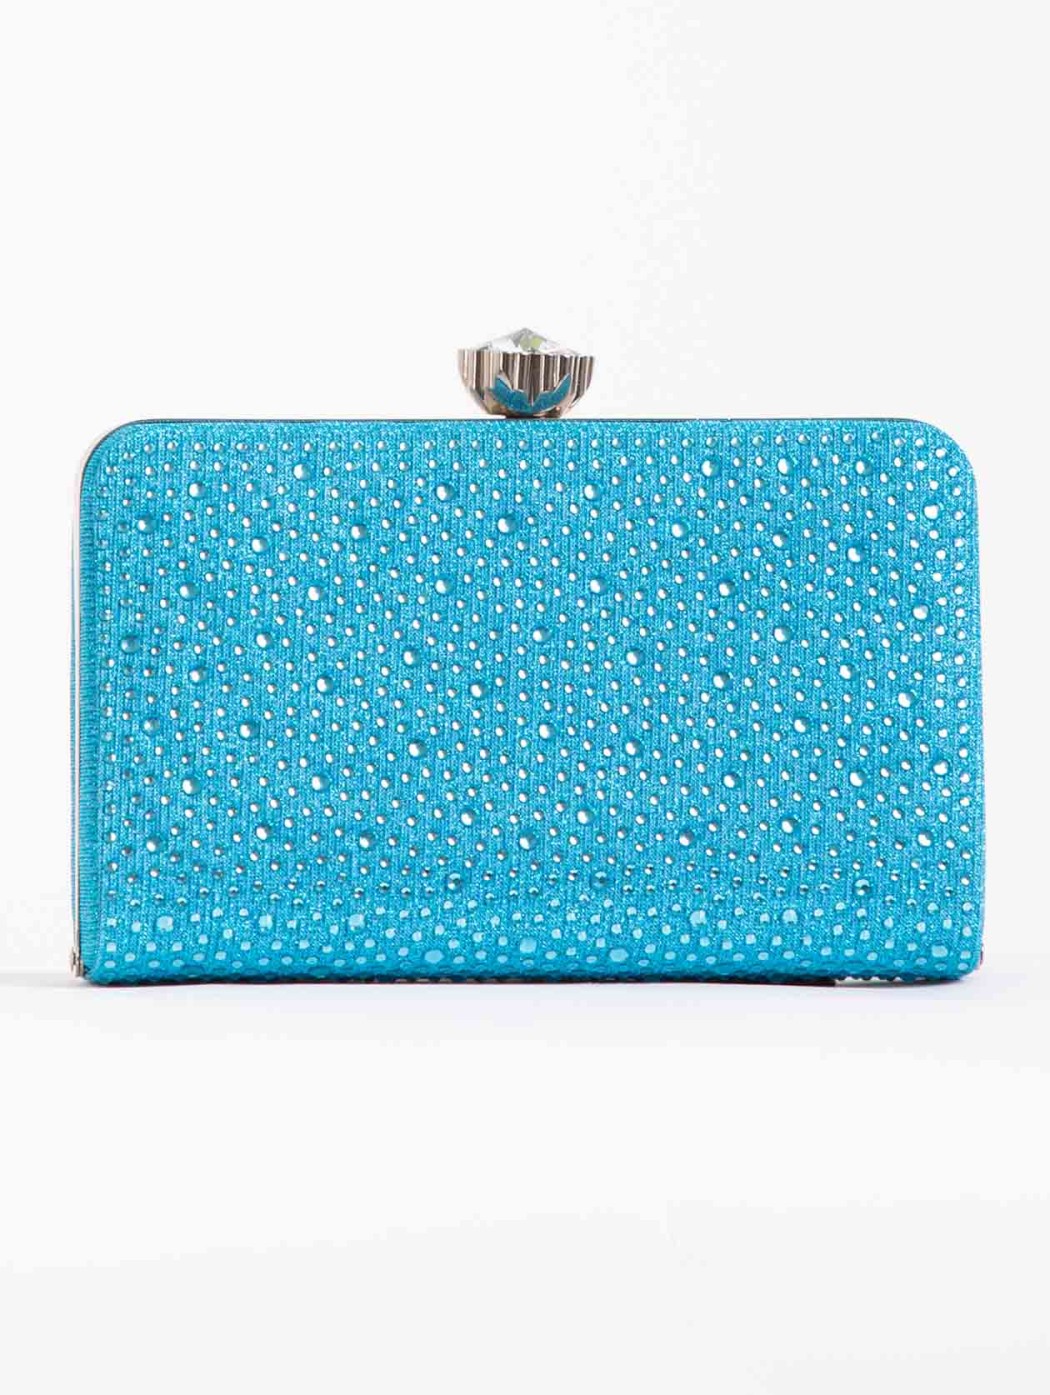 Anna Cecere Turquoise purse...